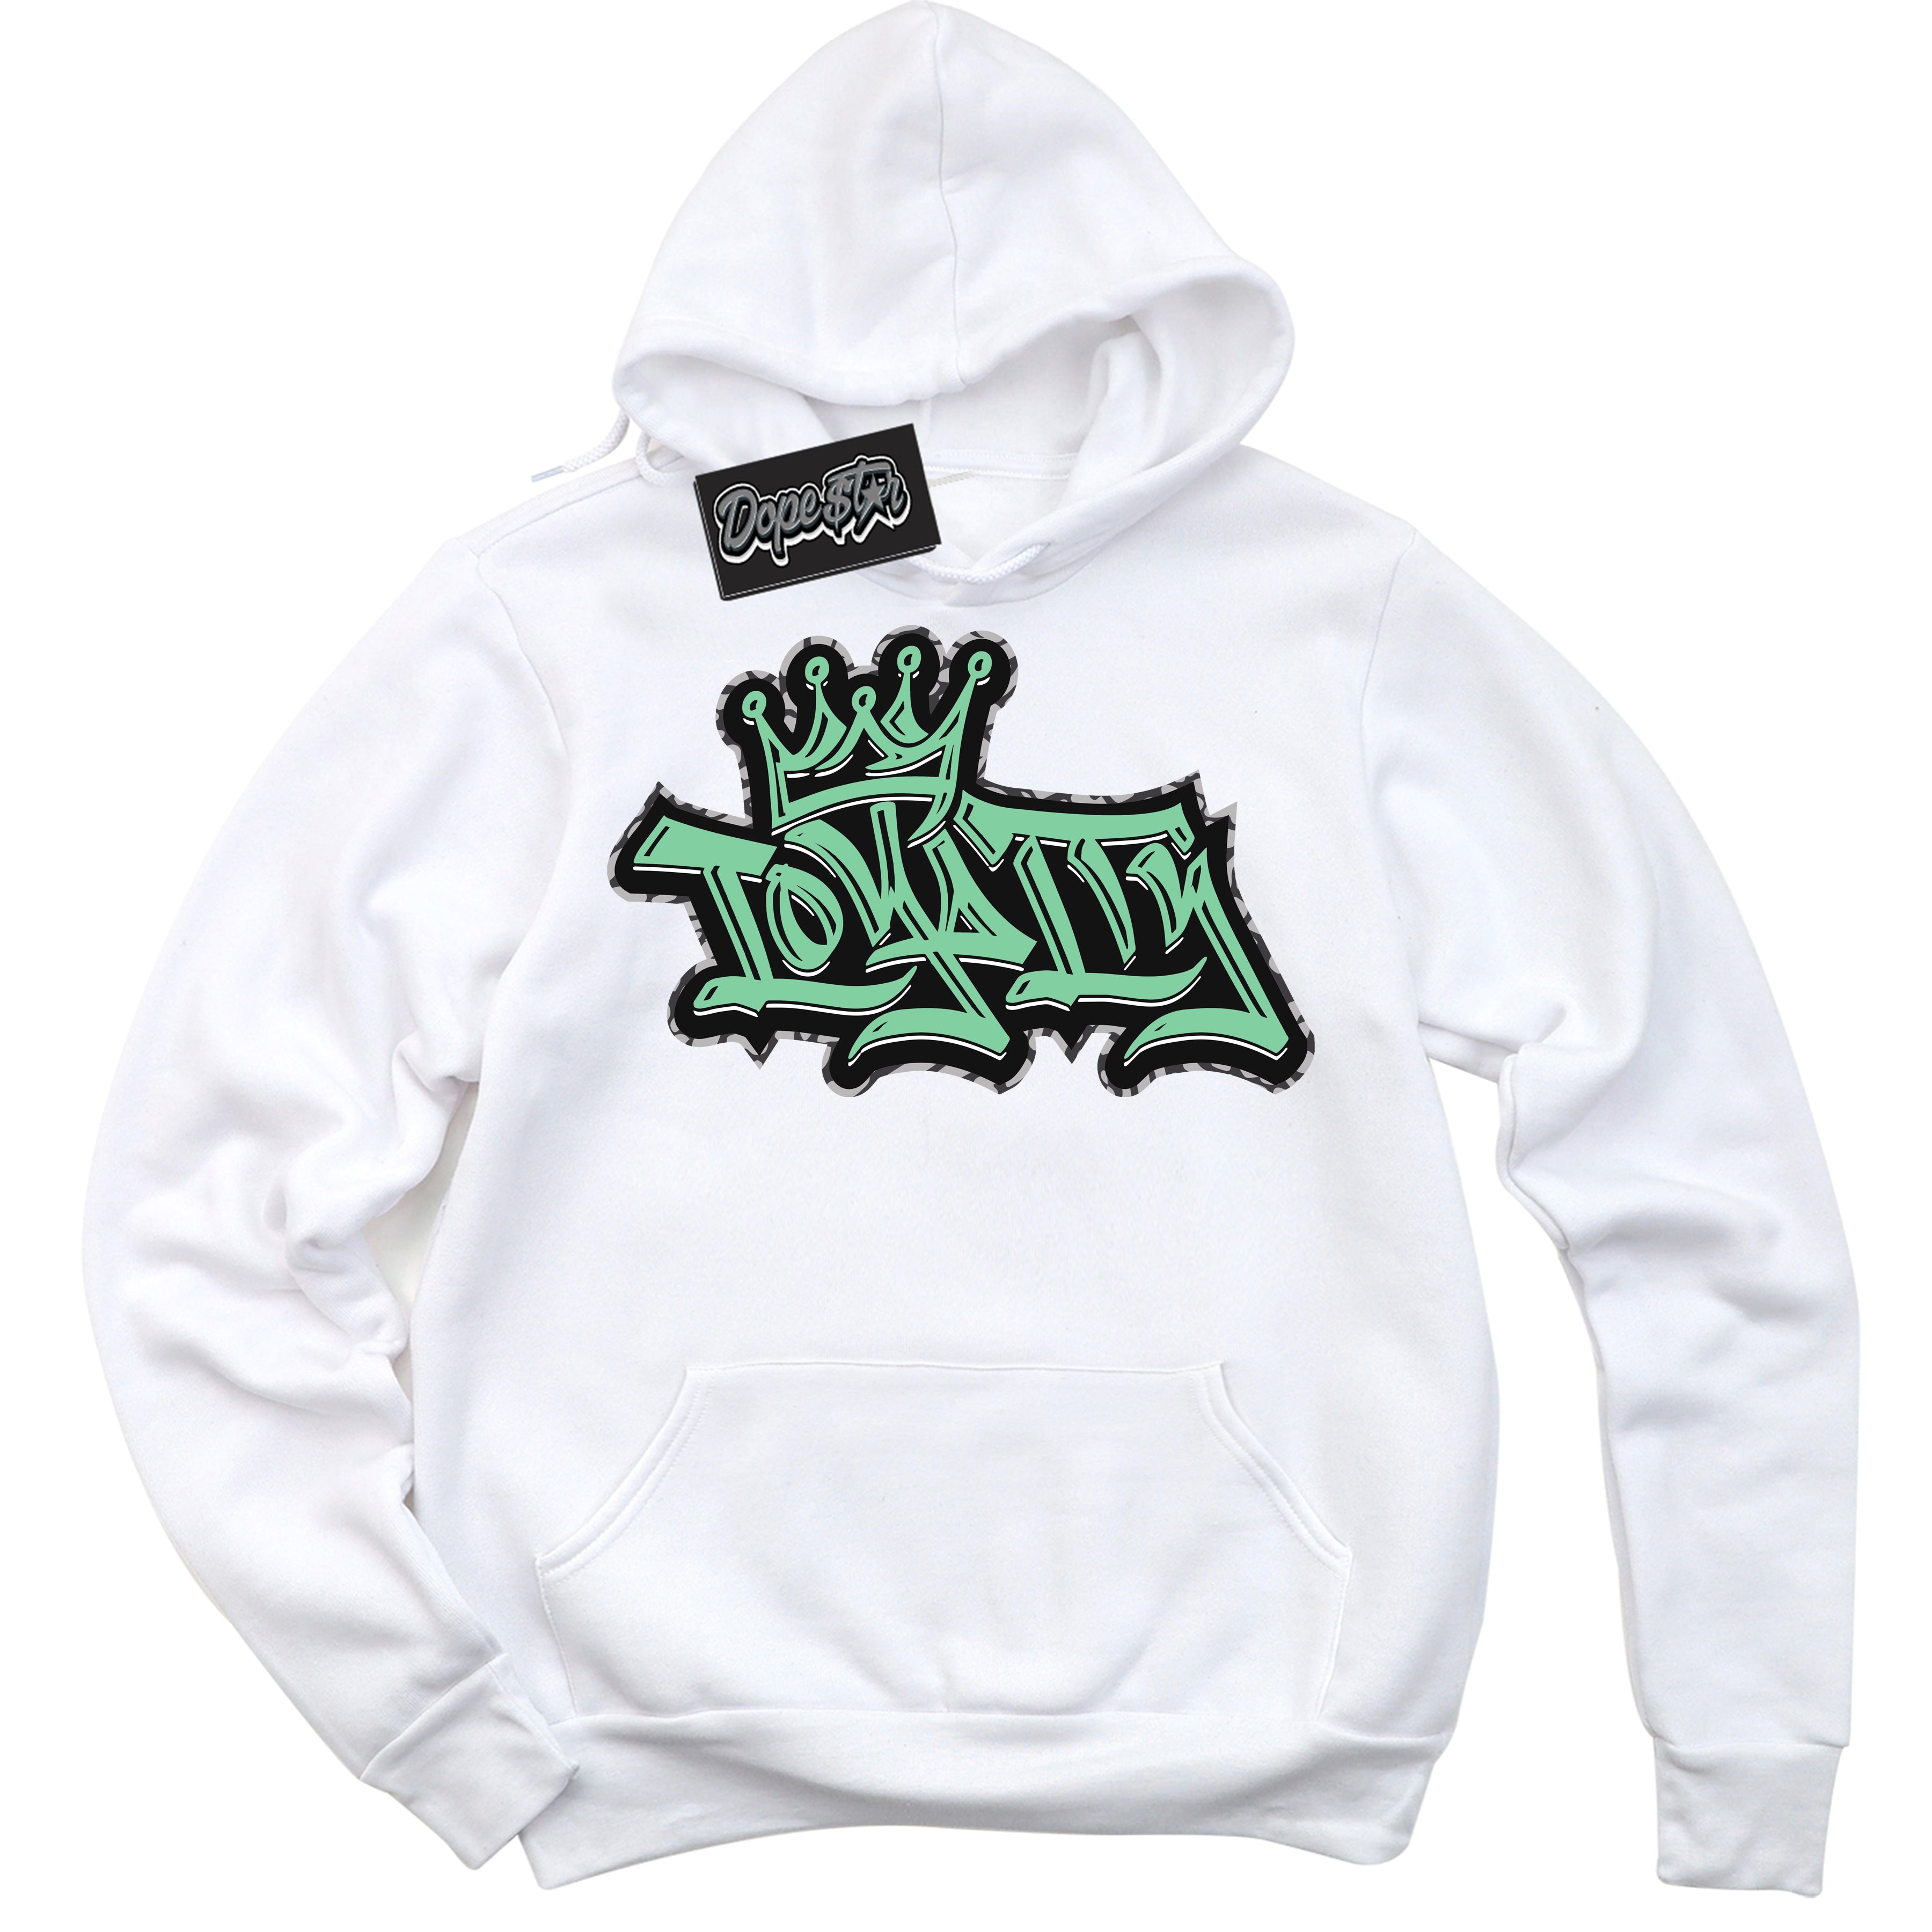 Cool White Graphic DopeStar Hoodie with “ Loyalty Crown “ print, that perfectly matches Green Glow 3s sneakers